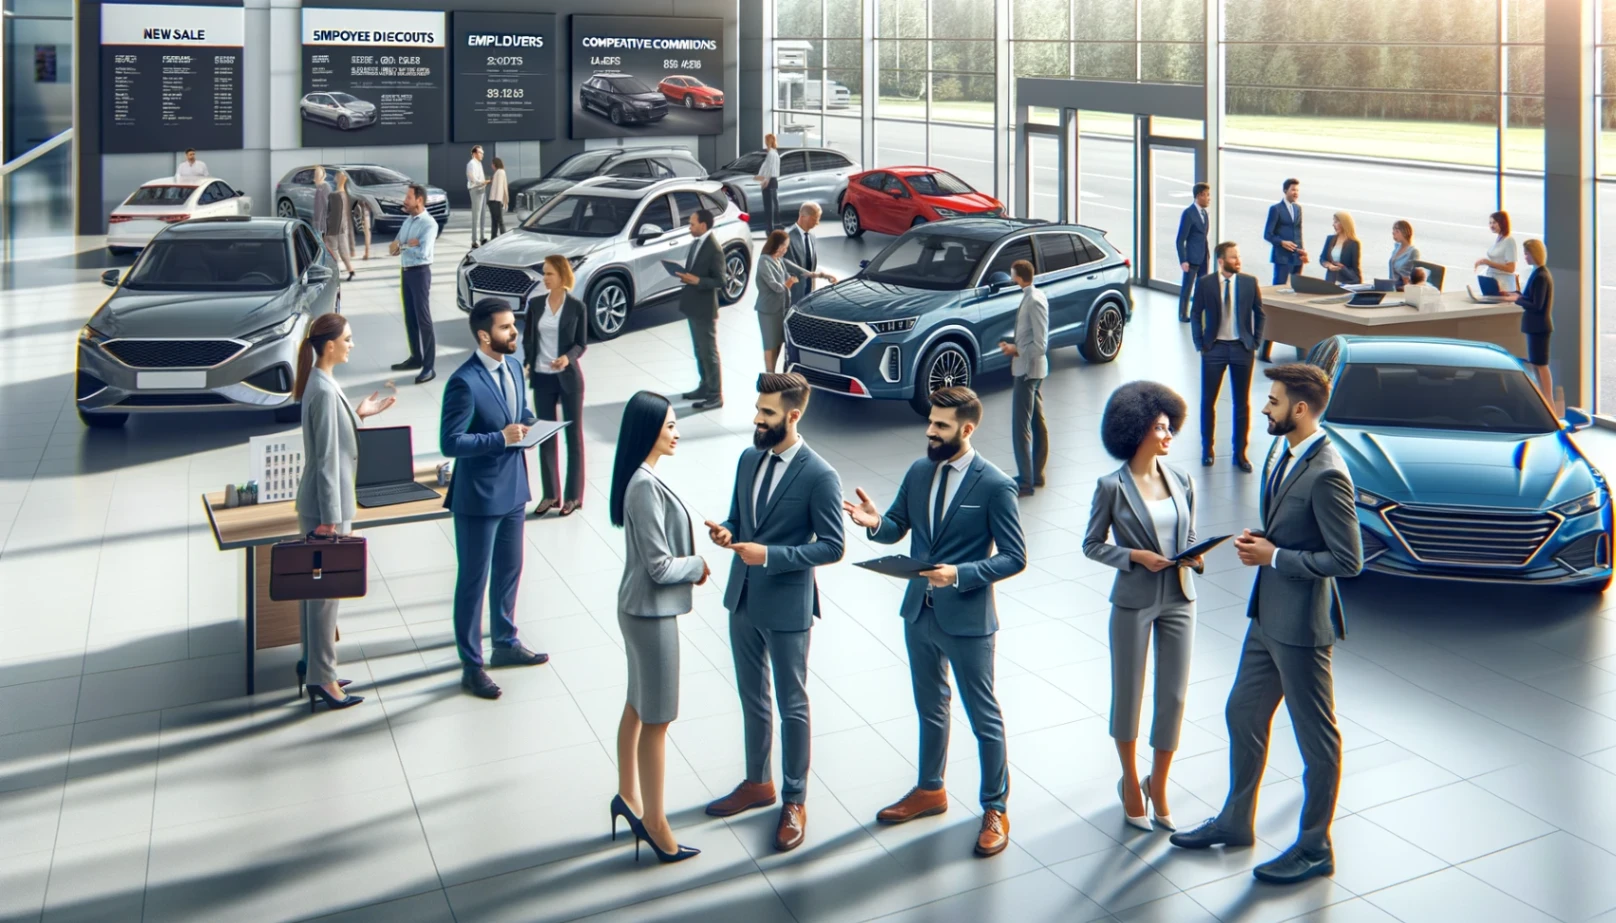 Automobile Sales Roles: 15% Employee Discount and Competitive Commissions for All Levels